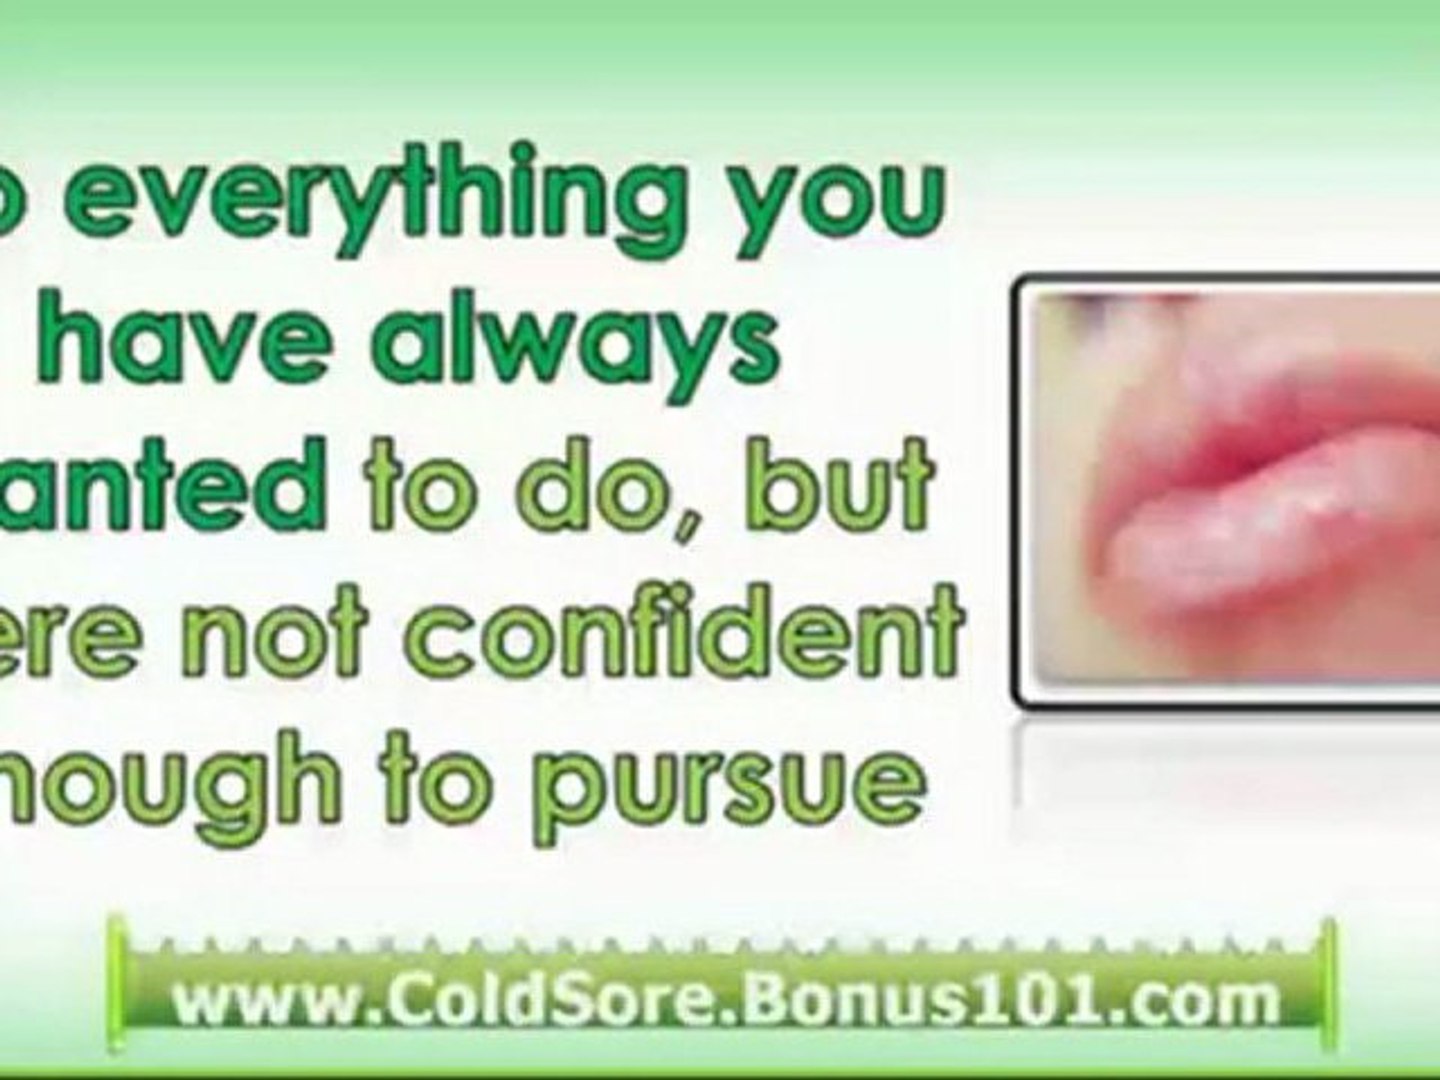 Get Rid Of Cold Sores Overnight How To Get Rid Of Cold Sores Quickly Getting Rid Of Cold Sores Fast Video Dailymotion